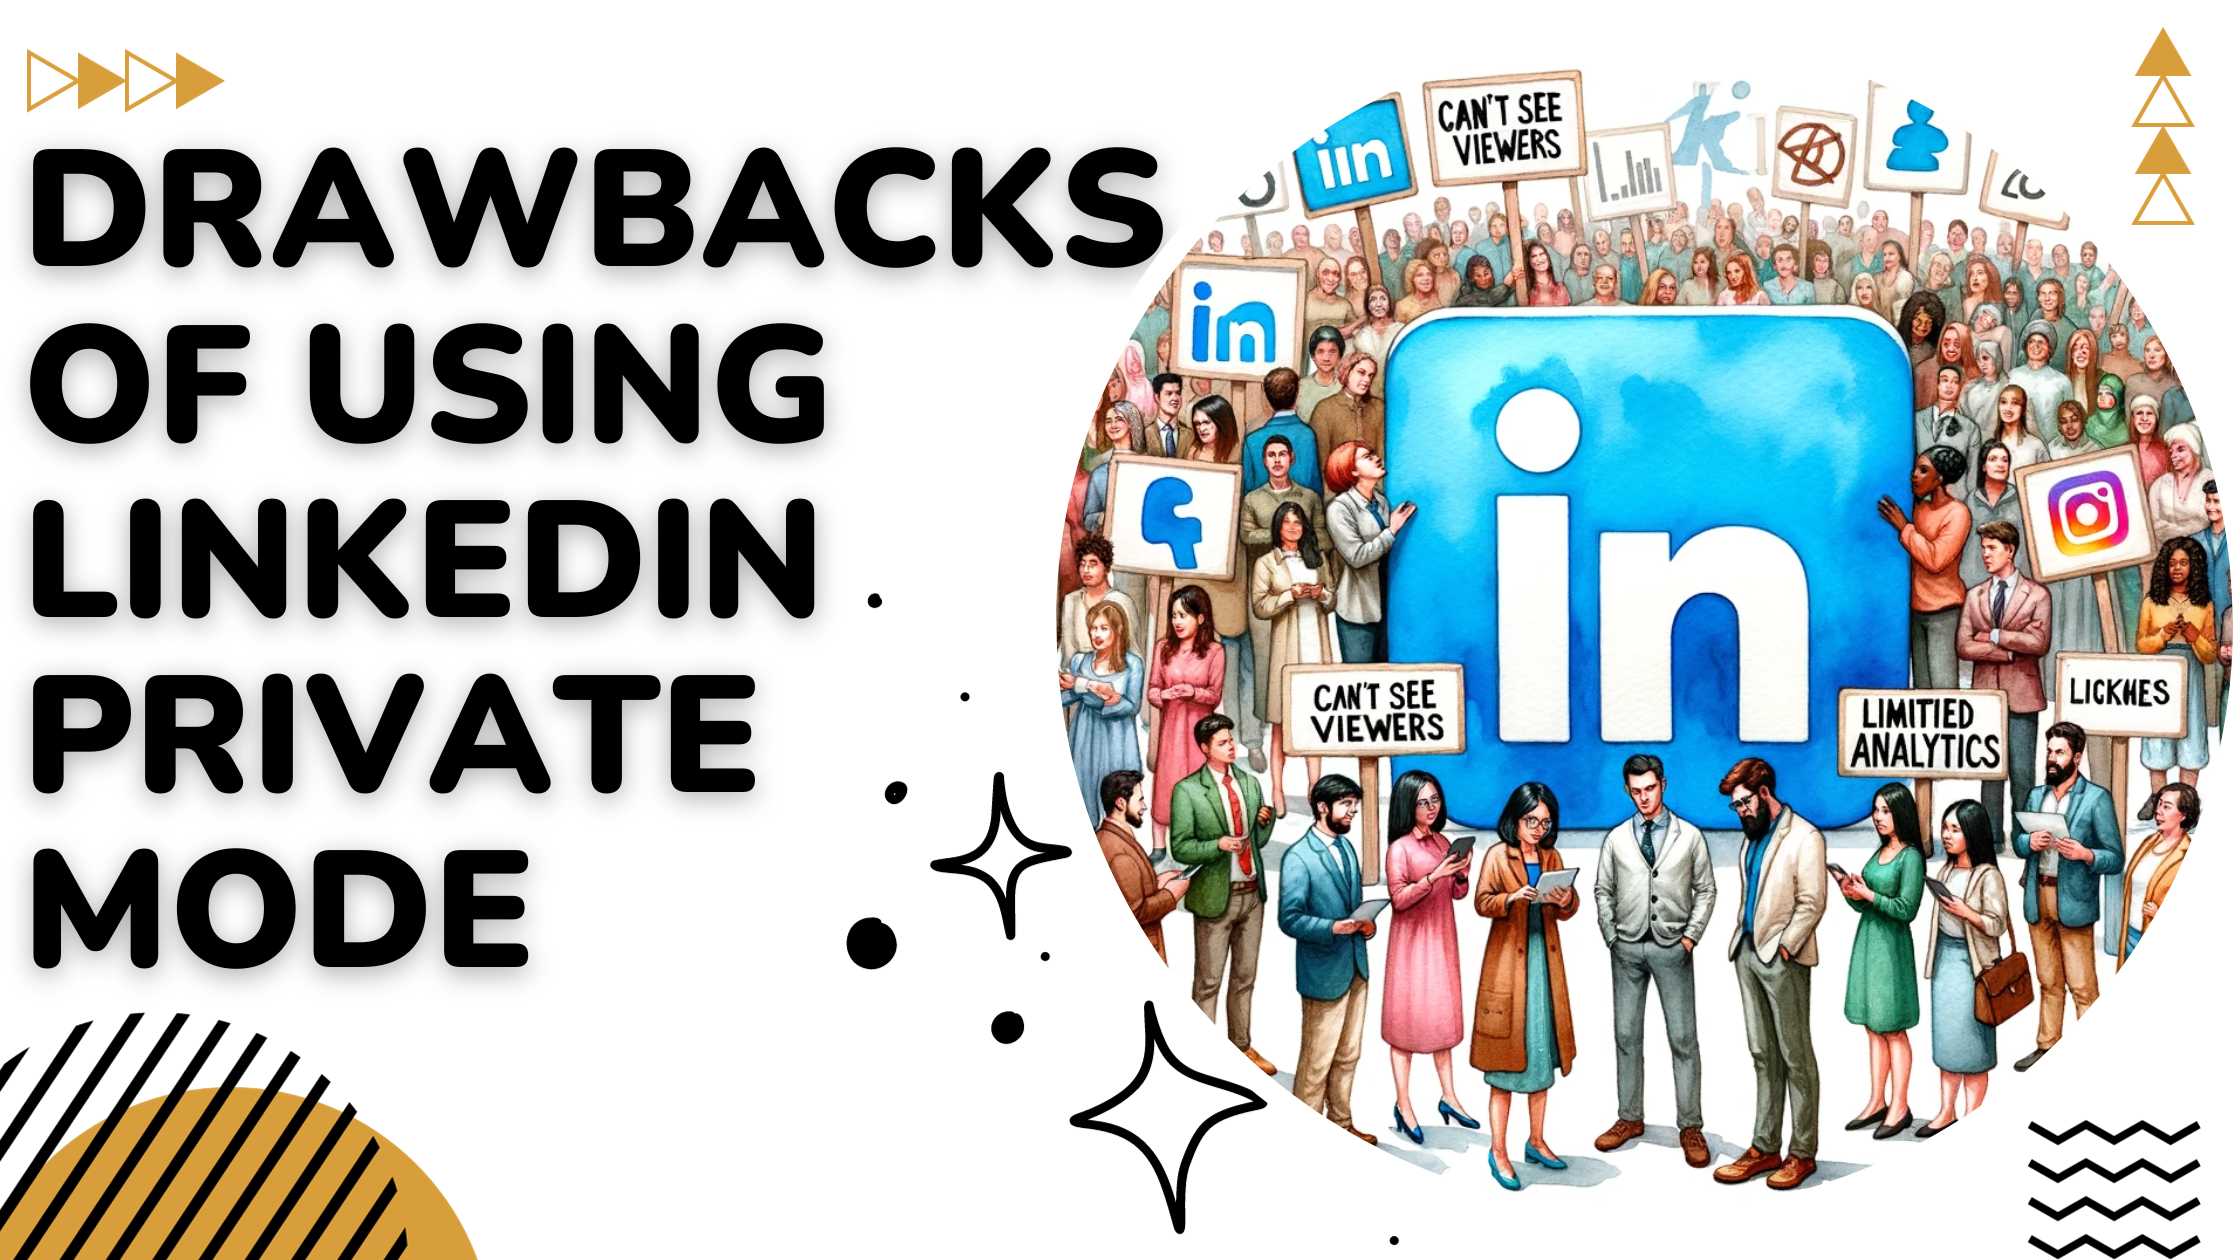 Heading image showing the drawbacks of using LinkedIn Private mode 